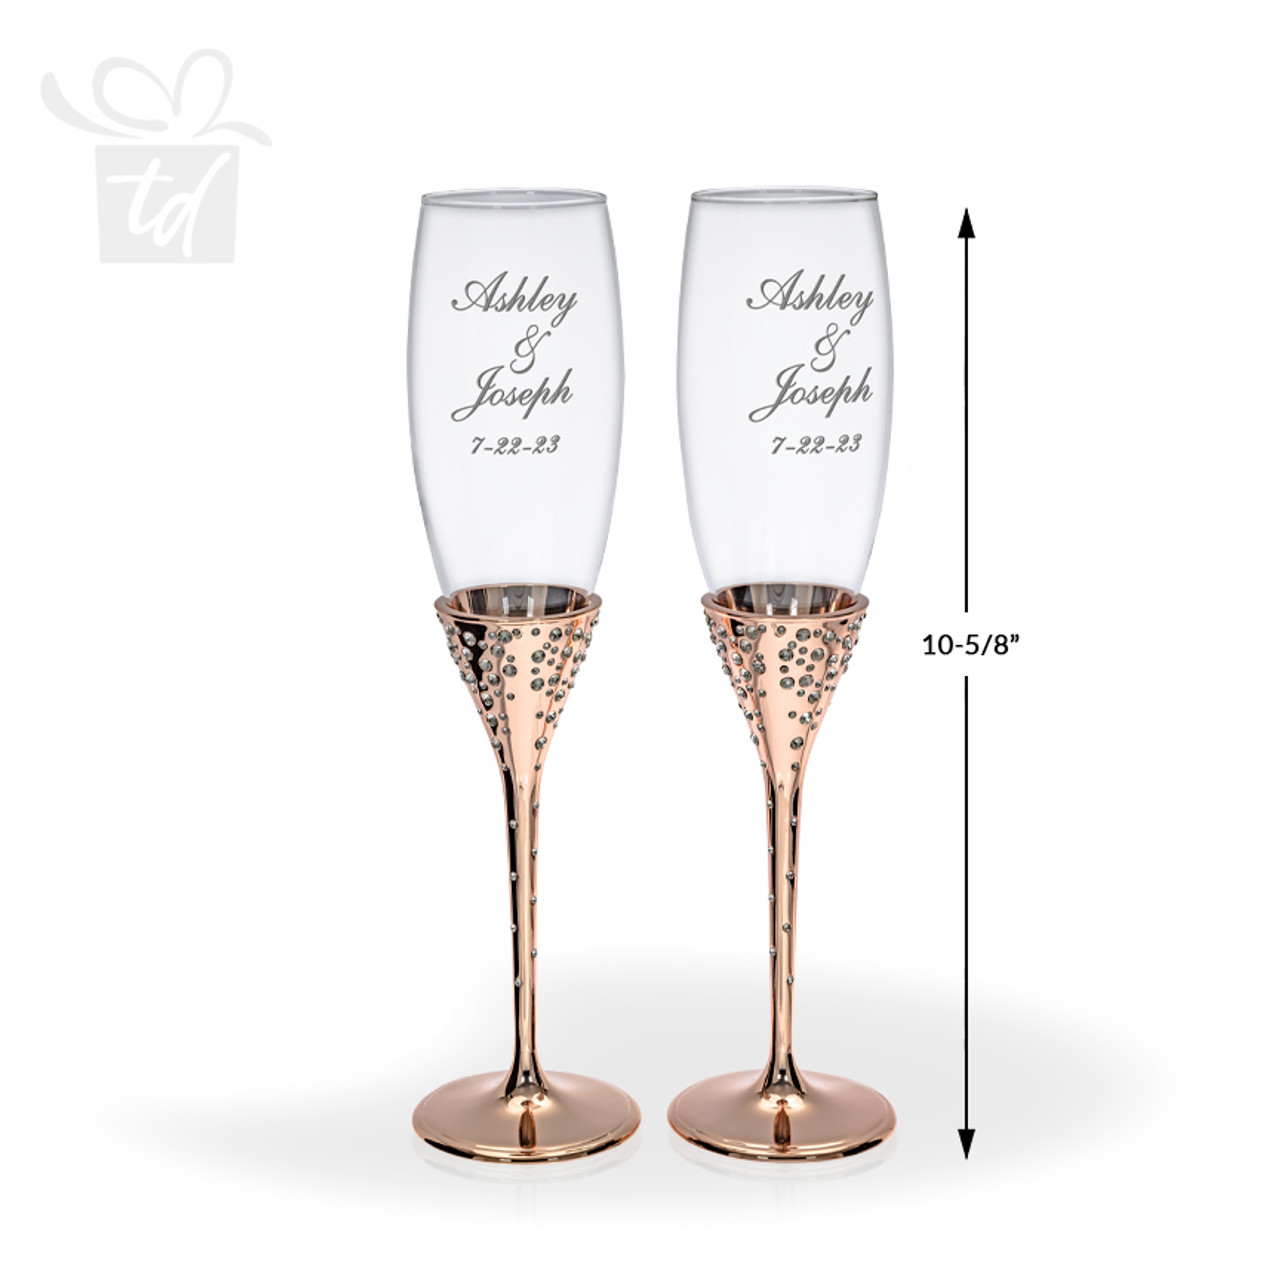 https://cdn11.bigcommerce.com/s-4qq7is6f5/images/stencil/1280x1280/products/883/4643/6712G-galaxy-rose-gold-flutes-height__90134__12243.1698241441.jpg?c=1